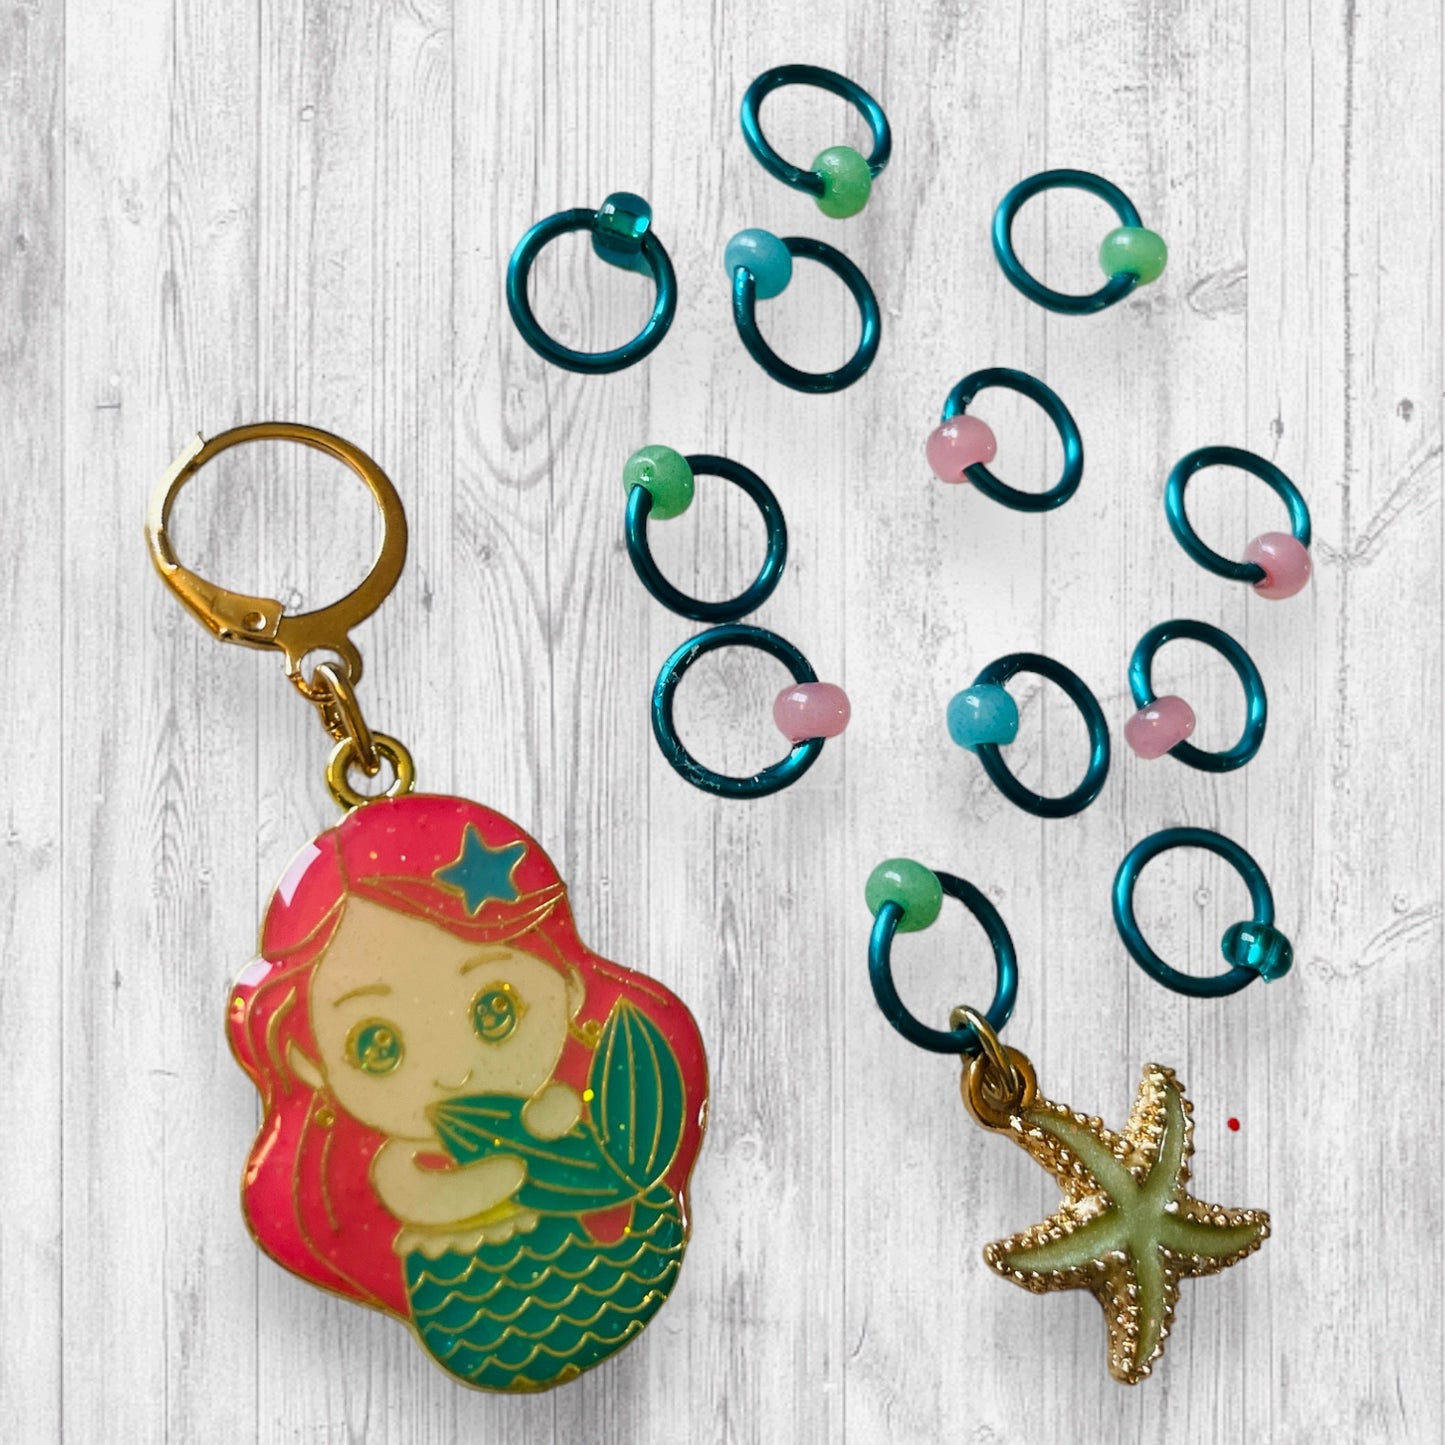 She Sells Seashells Progress and Stitch MarkersAdoreKnitMaking Waves Progress and Stitch Markers.  The prefect gift for a knitter! These stitch markers are great for a knitter or crocheter. Include in a swap package, teacSells Seashells Progress